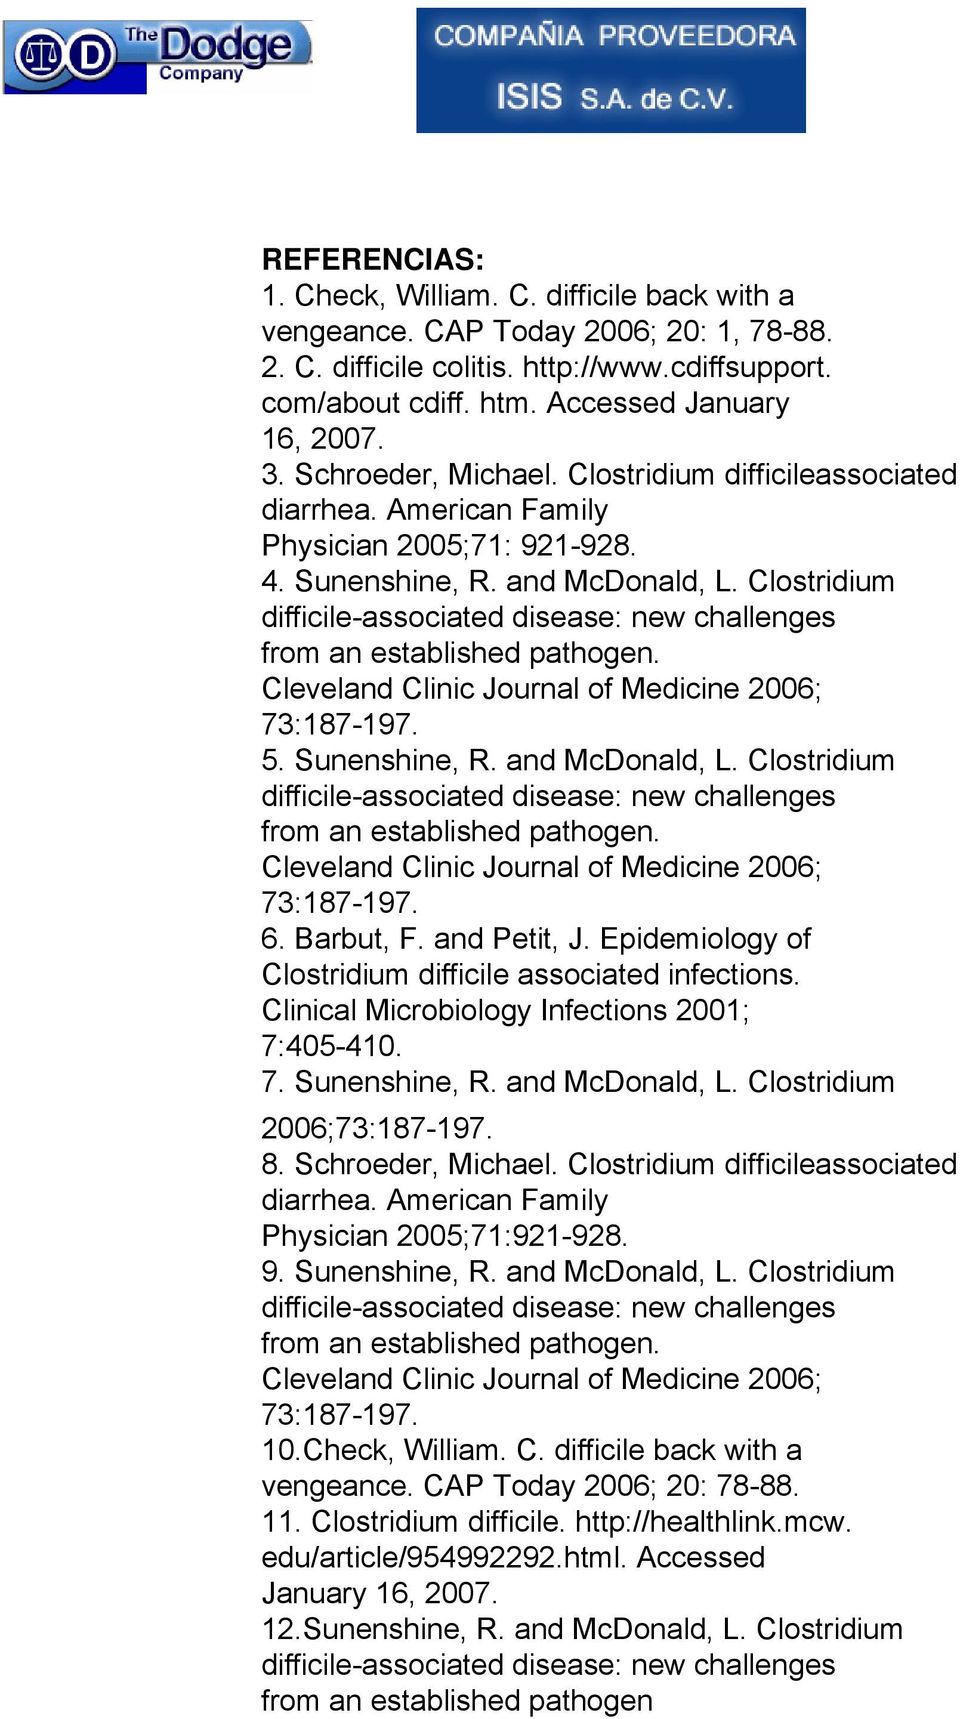 Barbut, F. and Petit, J. Epidemiology of Clostridium difficile associated infections. Clinical Microbiology Infections 2001; 7:405-410. 7. Sunenshine, R. and McDonald, L. Clostridium 2006; 8.